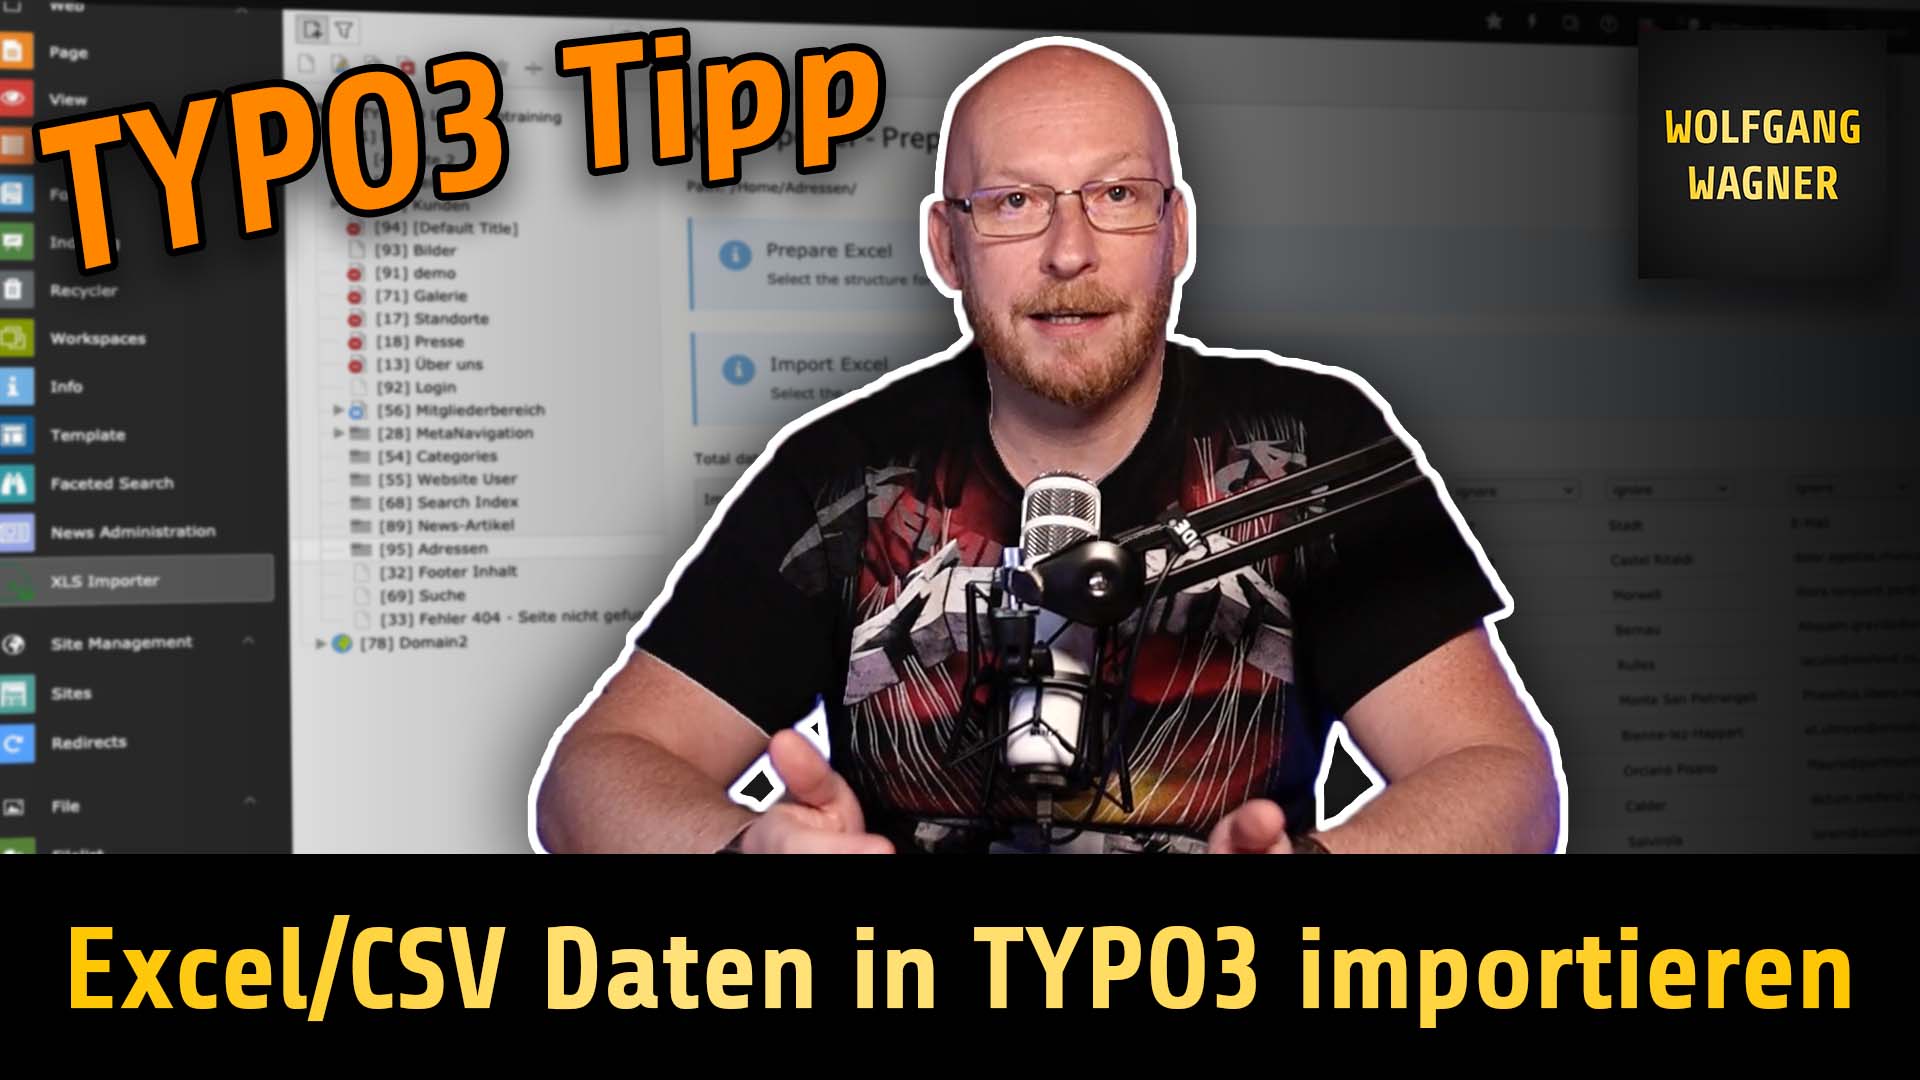 You are currently viewing TYPO3-Tipp: Excel/CSV Dateien in TYPO3 importieren